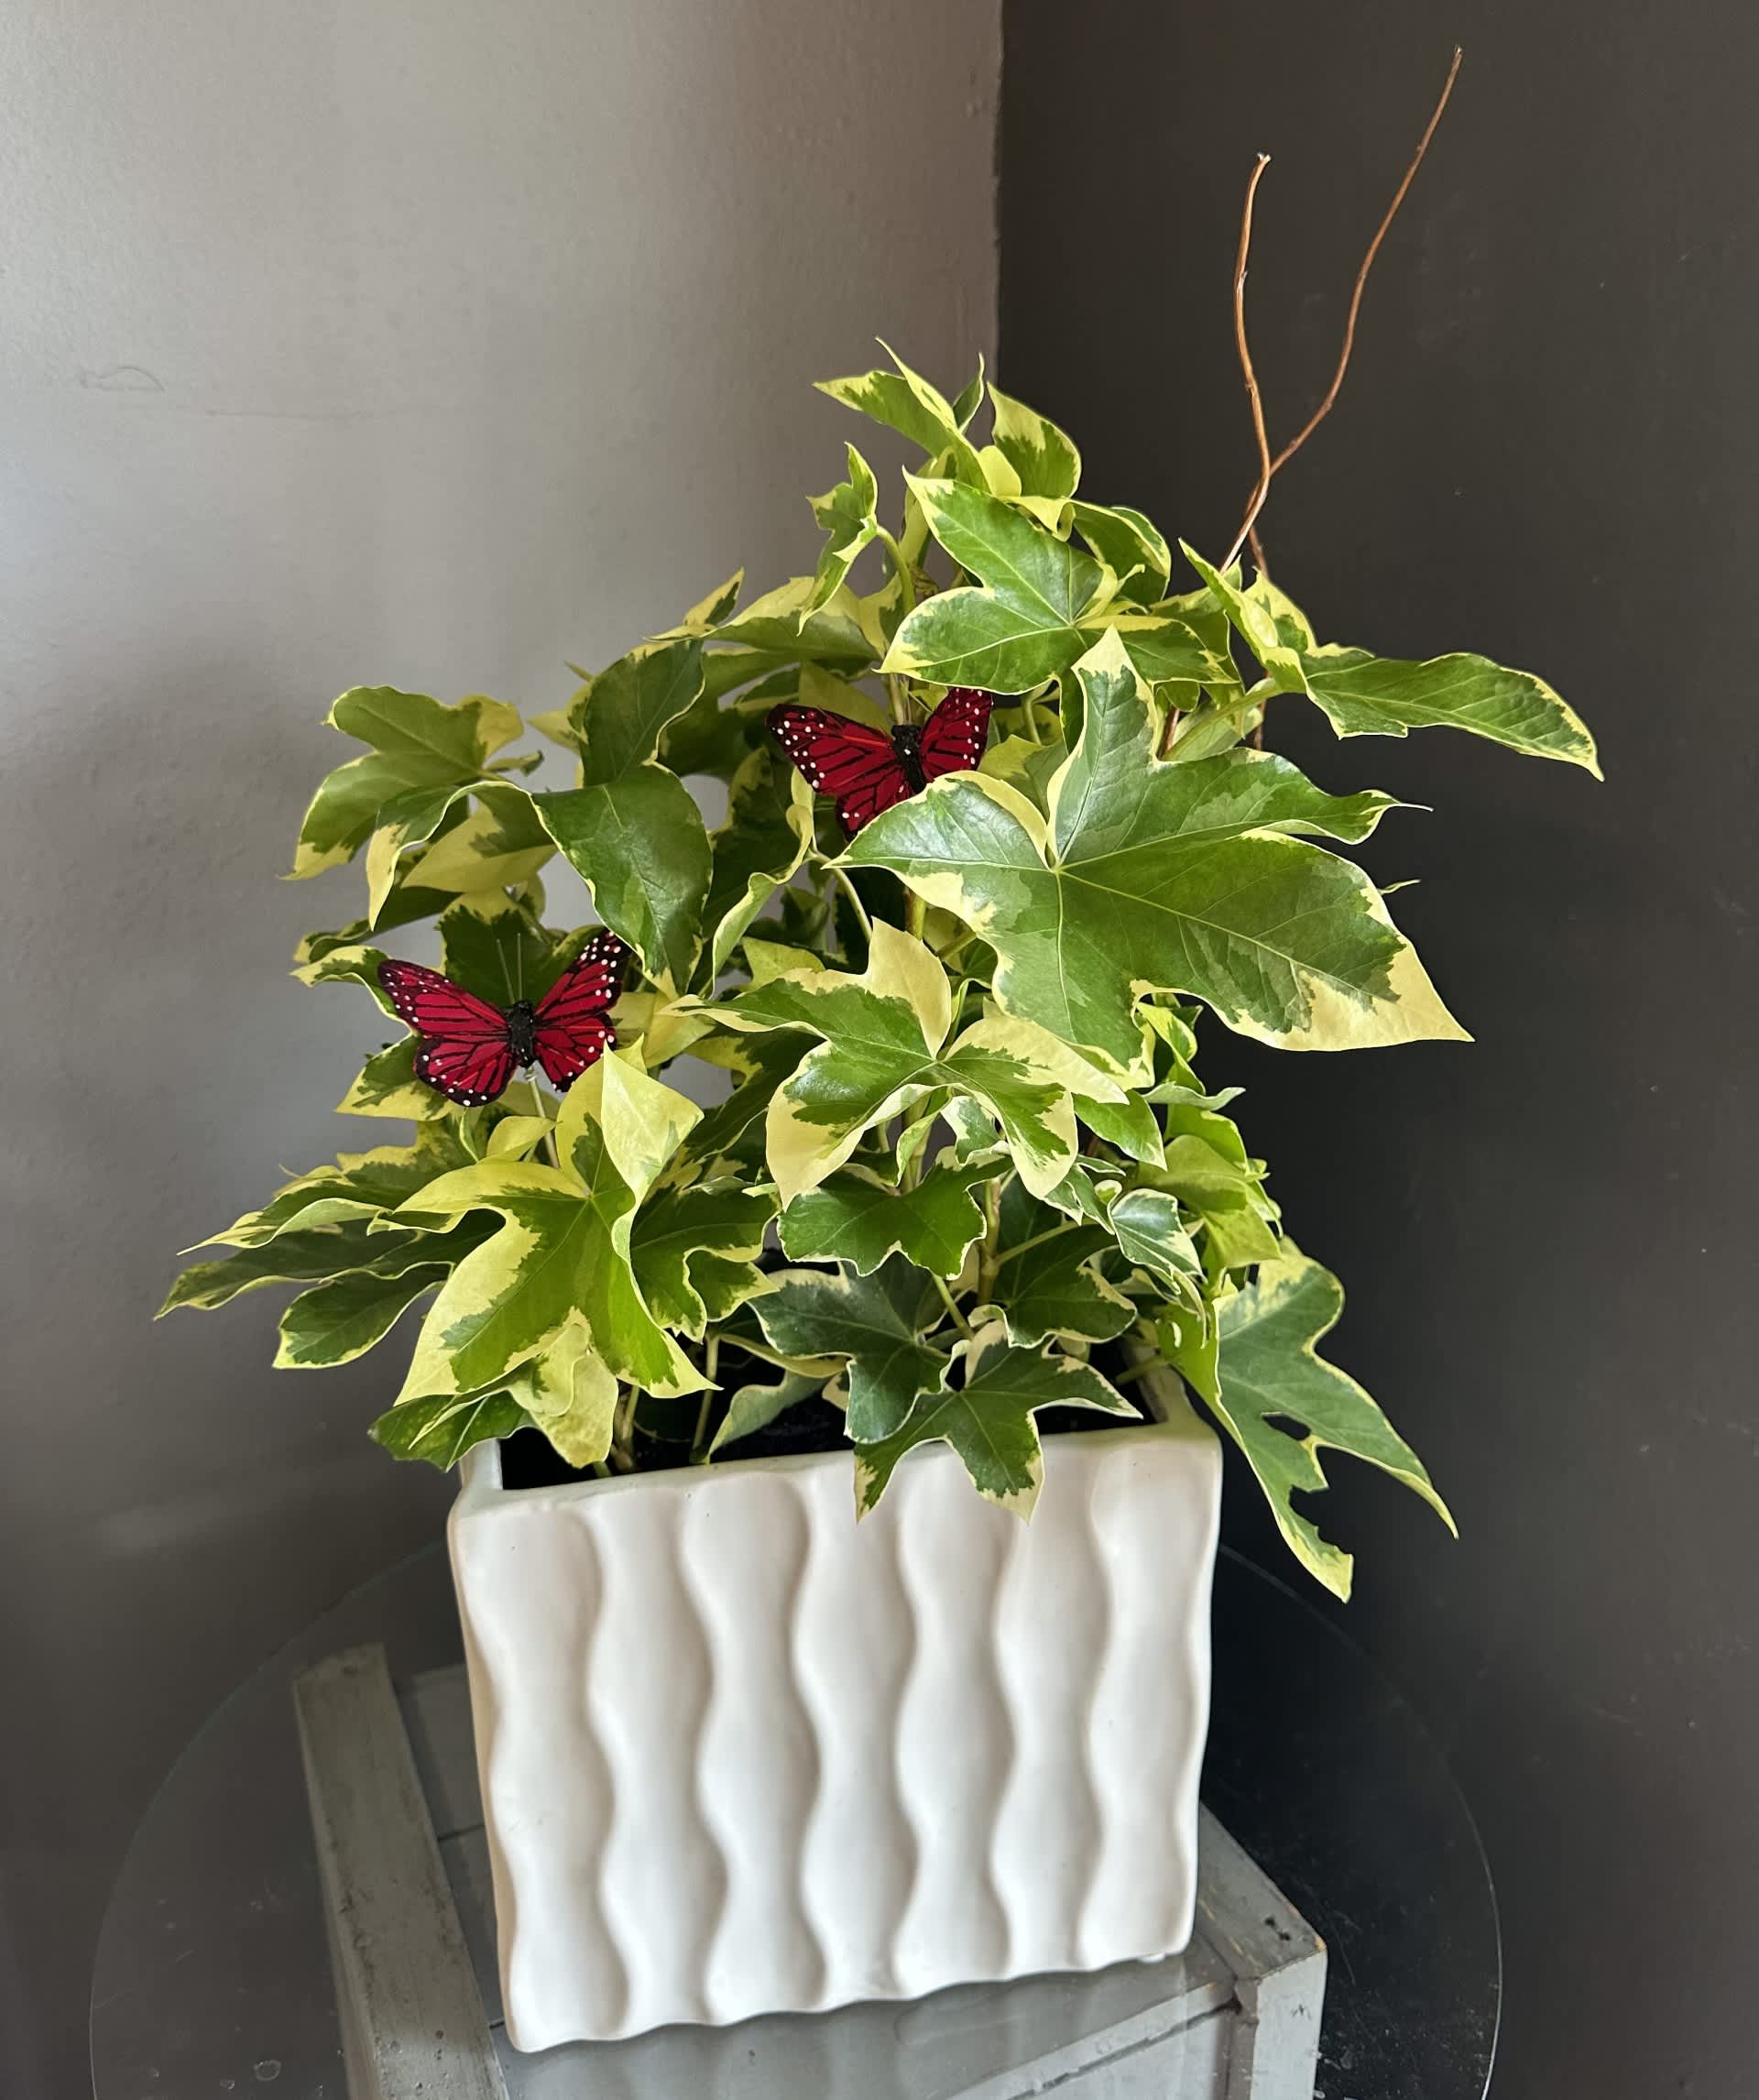 Sweet &amp; Simple - Potted houseplant in a decorative ceramic dish. Simple way to bring life to any space and makes for a great gift. Comes with decorative pink butterflies.